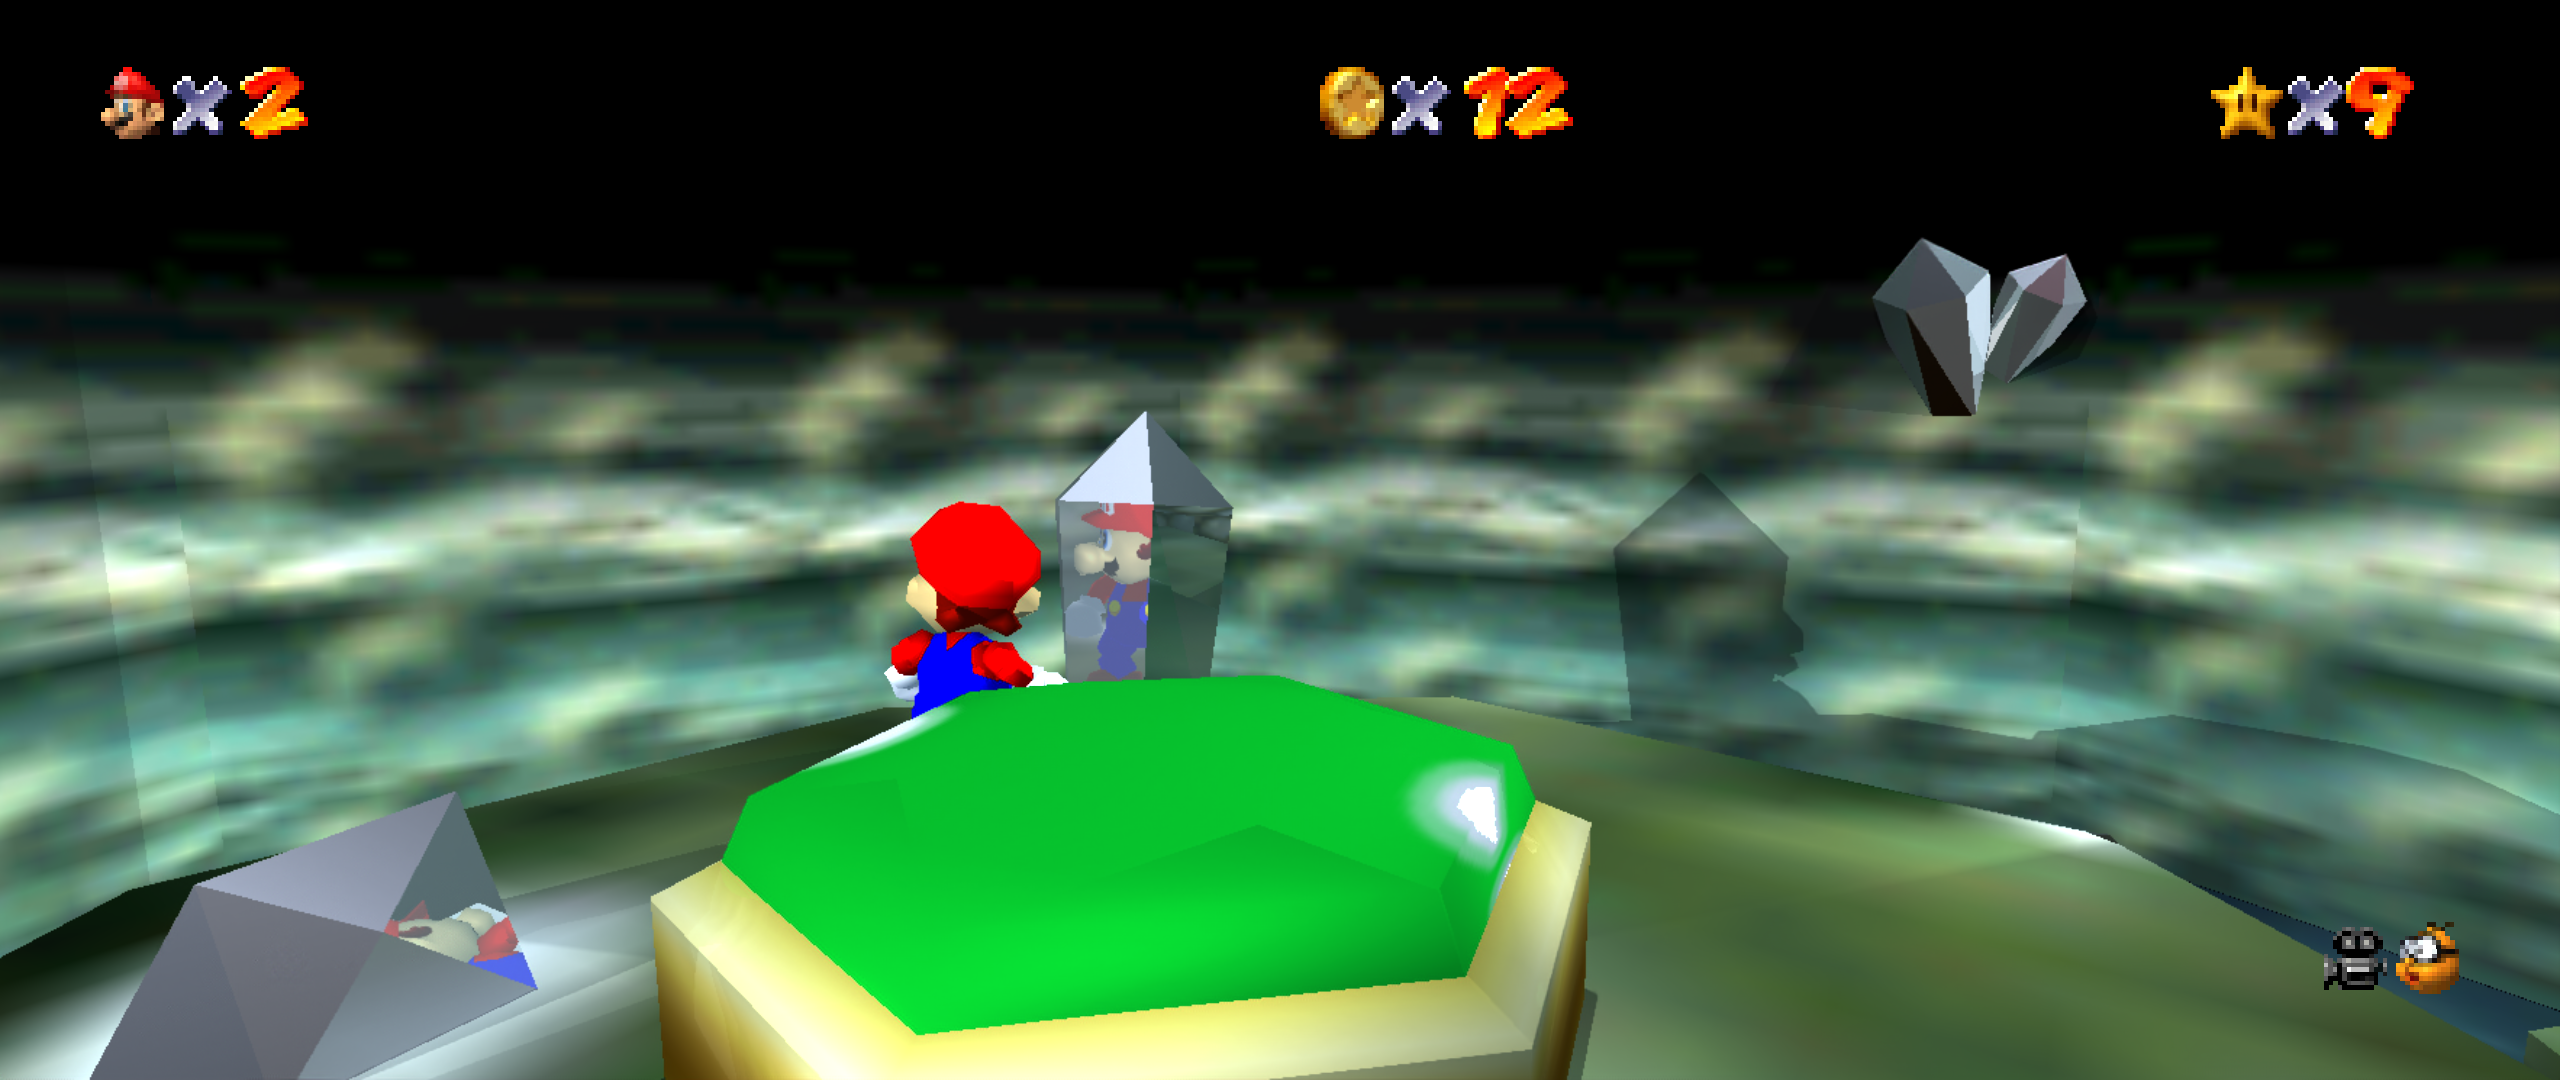 Super Mario 64 PC Port Supports 4K Resolution, Ray Tracing